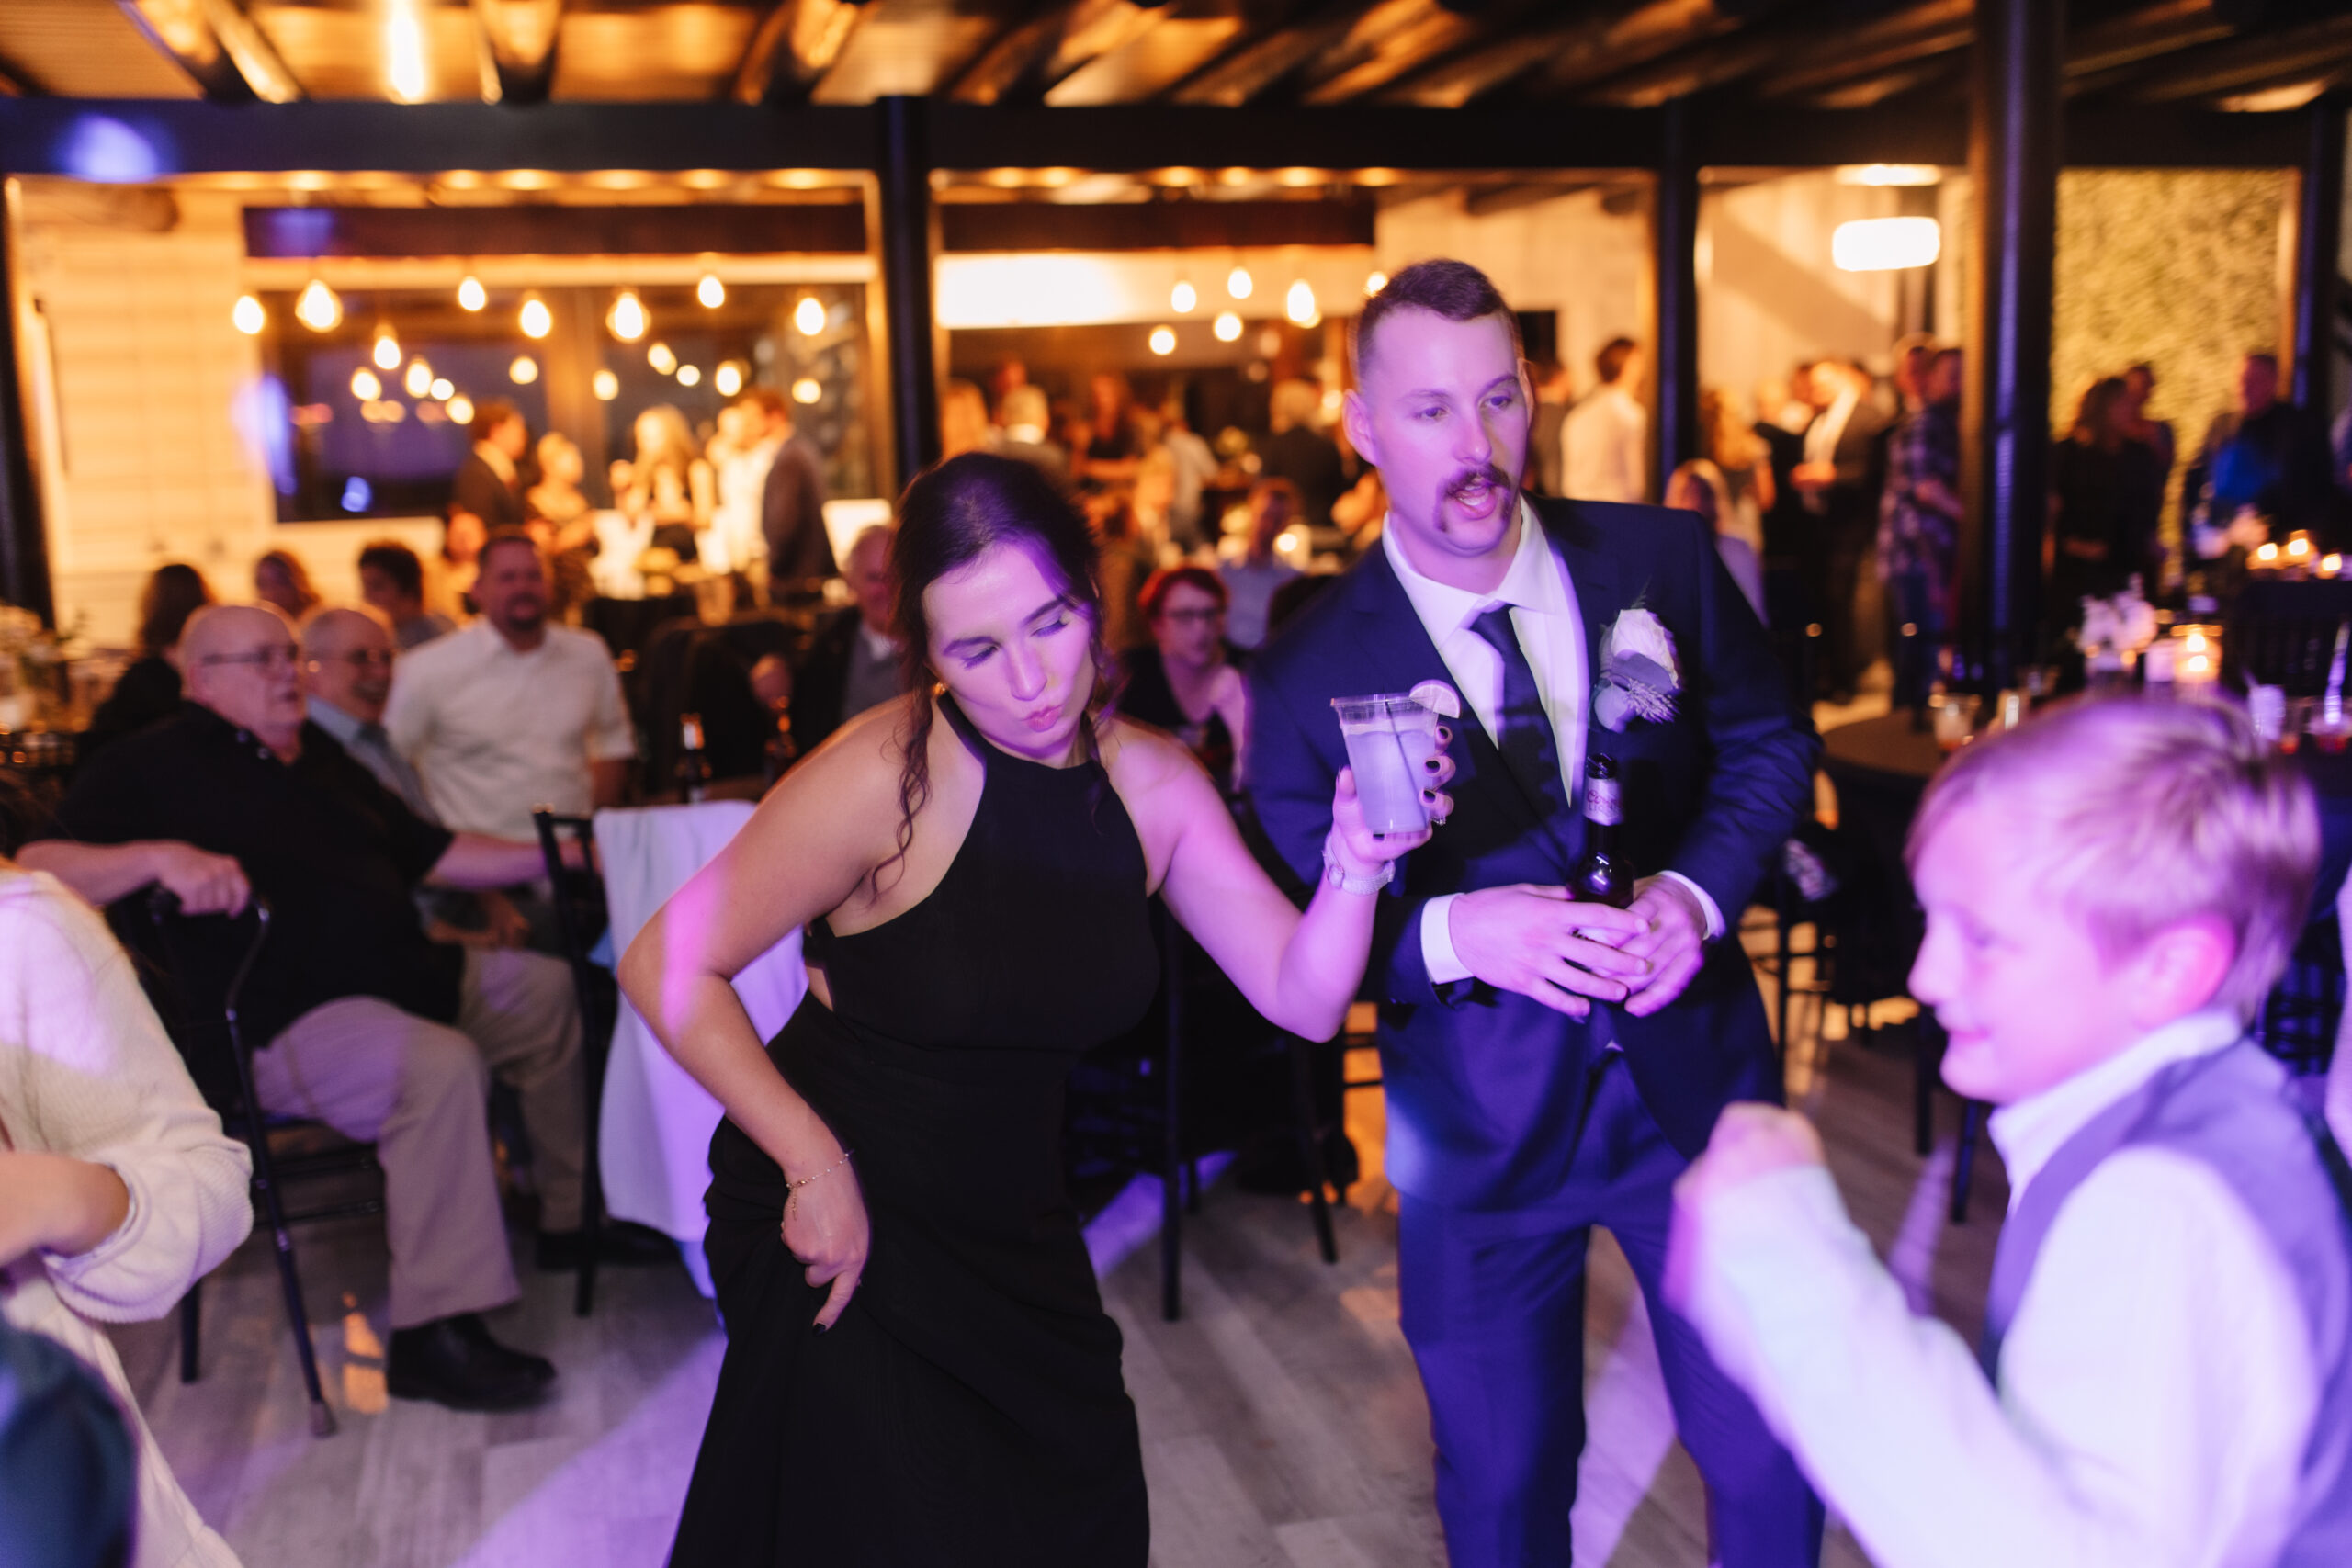 Guests dancing have a fun time on the dance floor at a wedding. Purple and yellow lights surround them